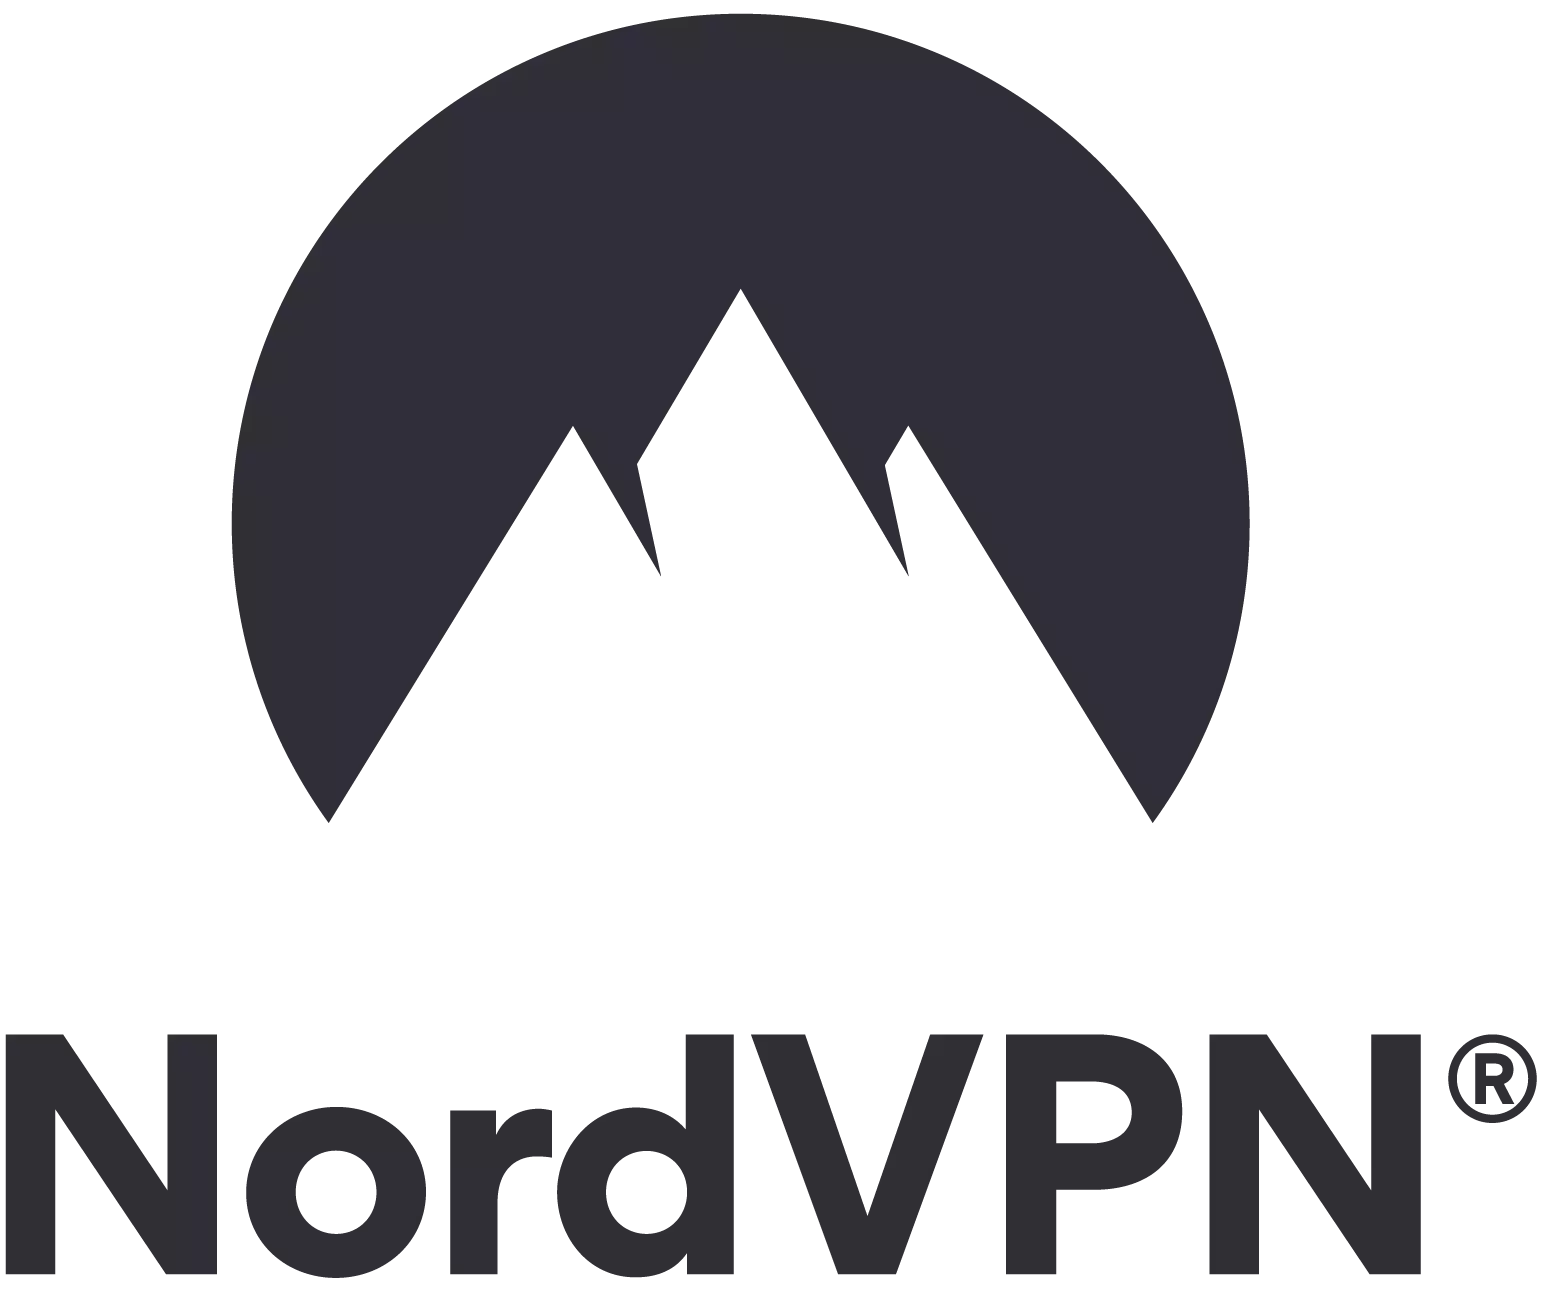 NordVPN - with the ultimate cybersecurity package